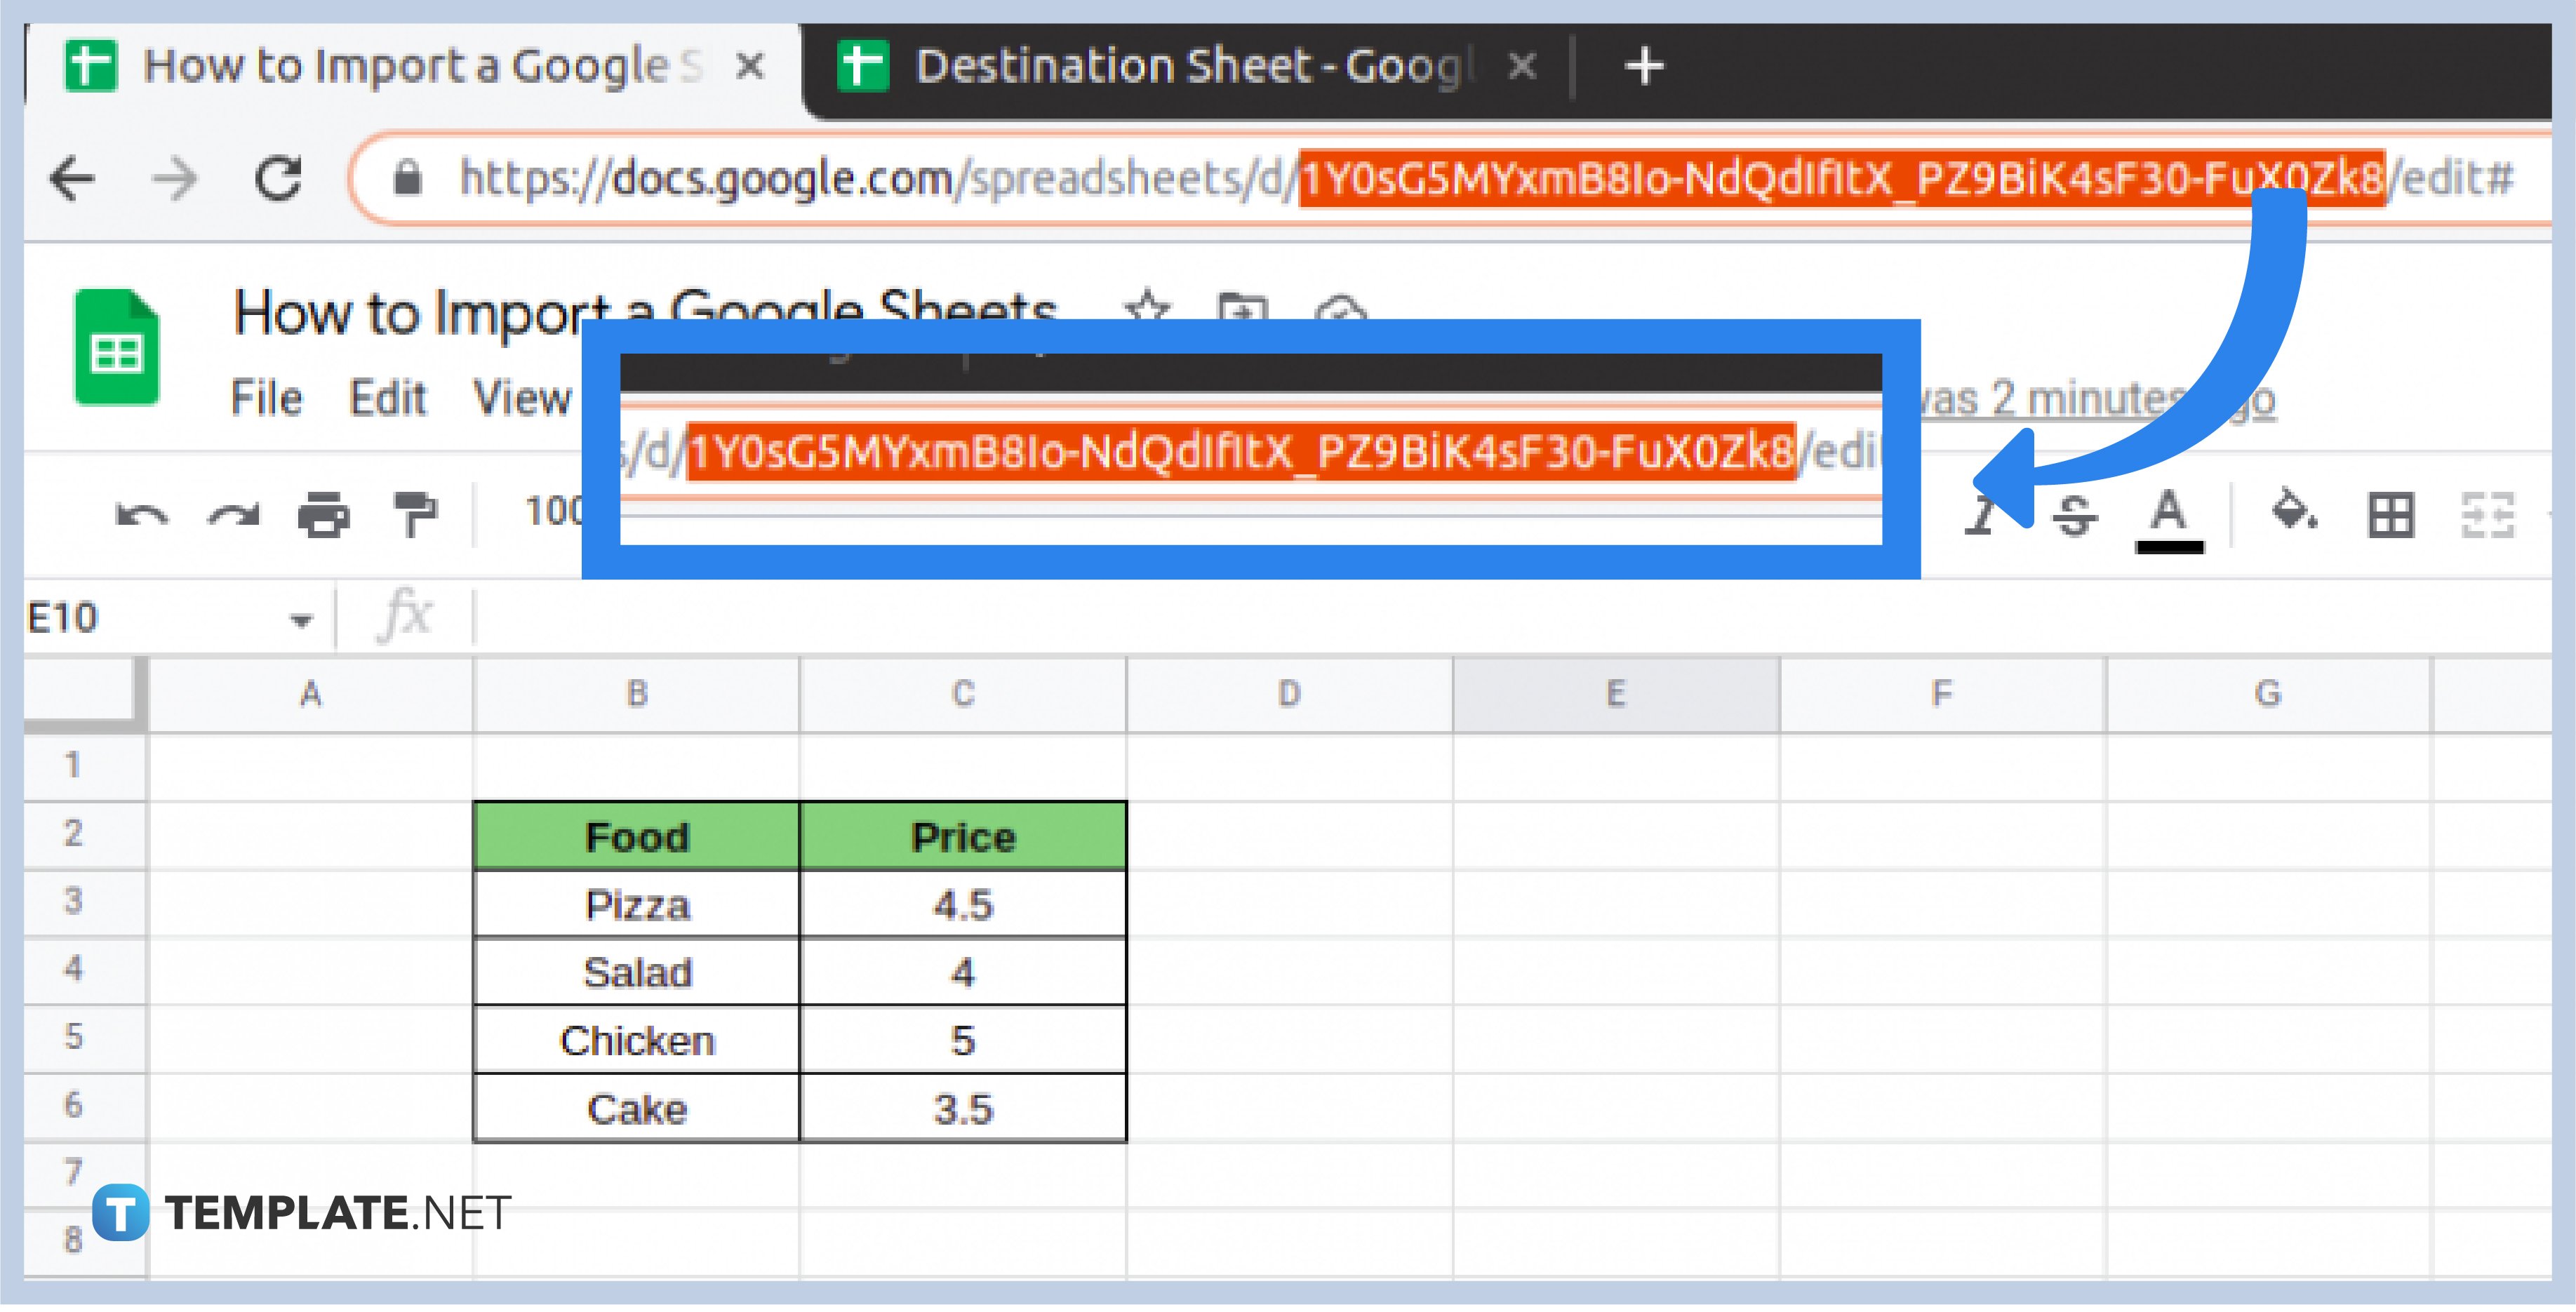 how-to-import-a-google-sheets-step-4